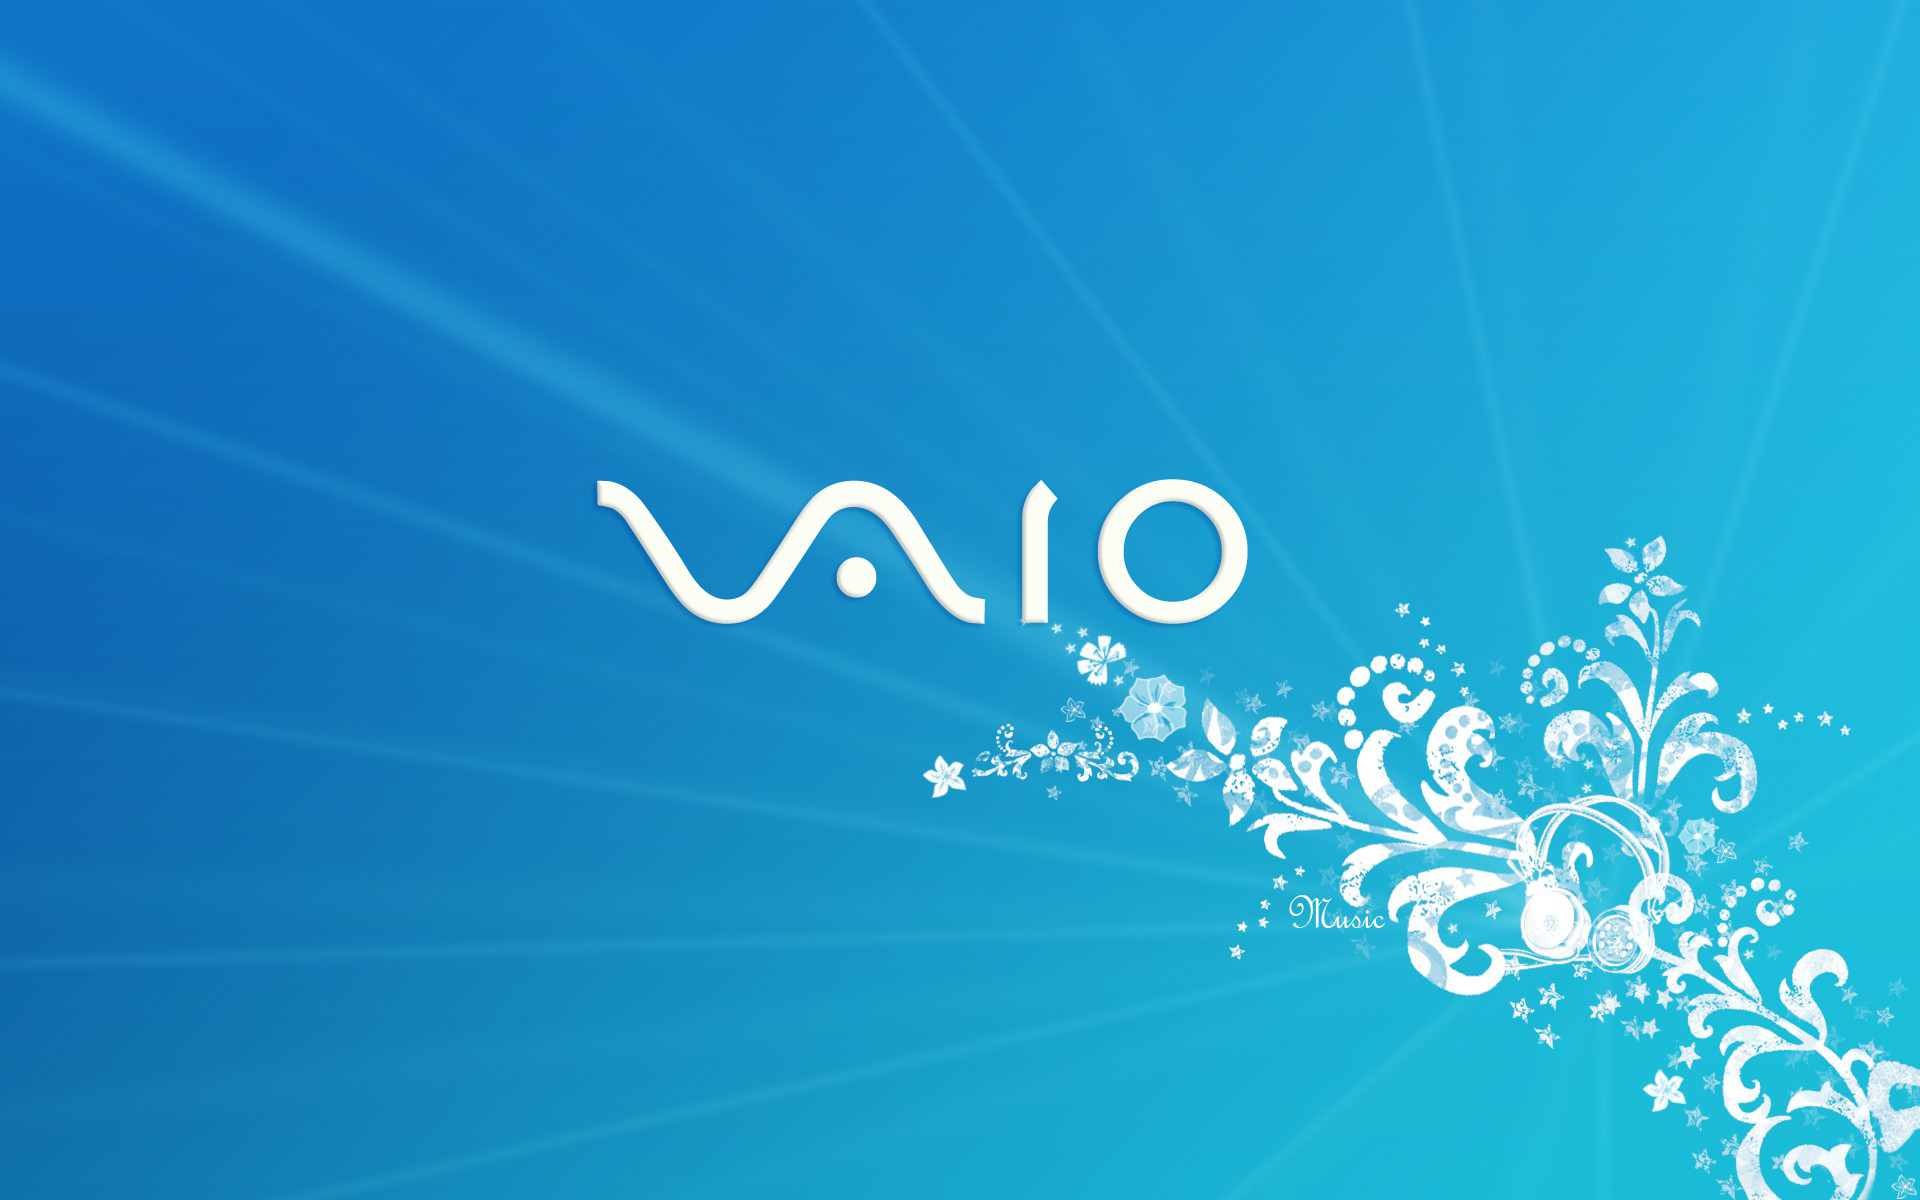 Sony Vaio Blue HD Wallpaper High Definition Collection